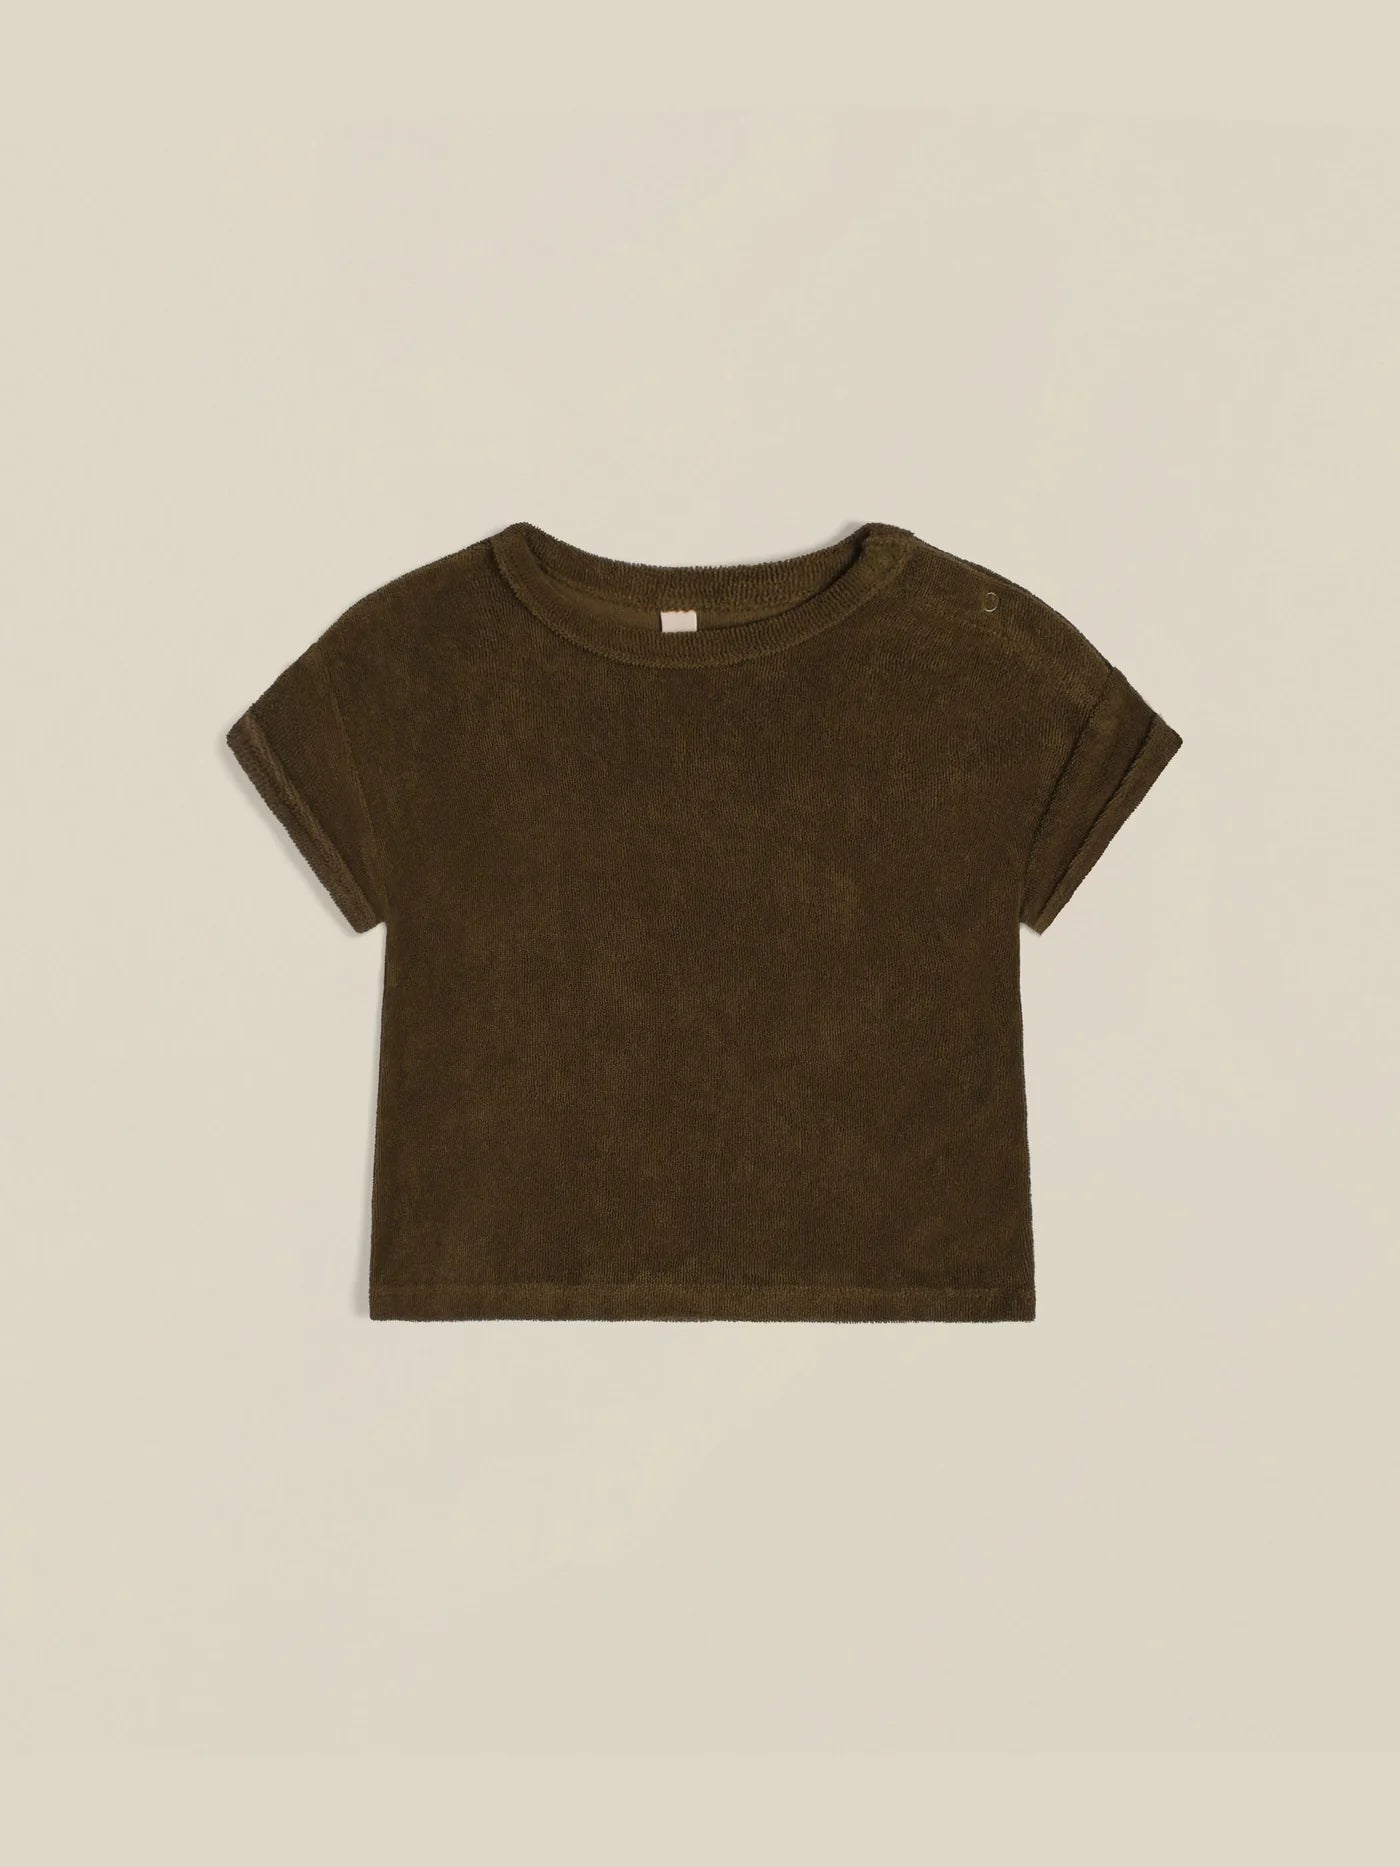 Organic Zoo - Tee-shirt / Olive Terry Oversized-Organic Zoo-Super Châtaigne-T-shirts & Débardeurs : Product type